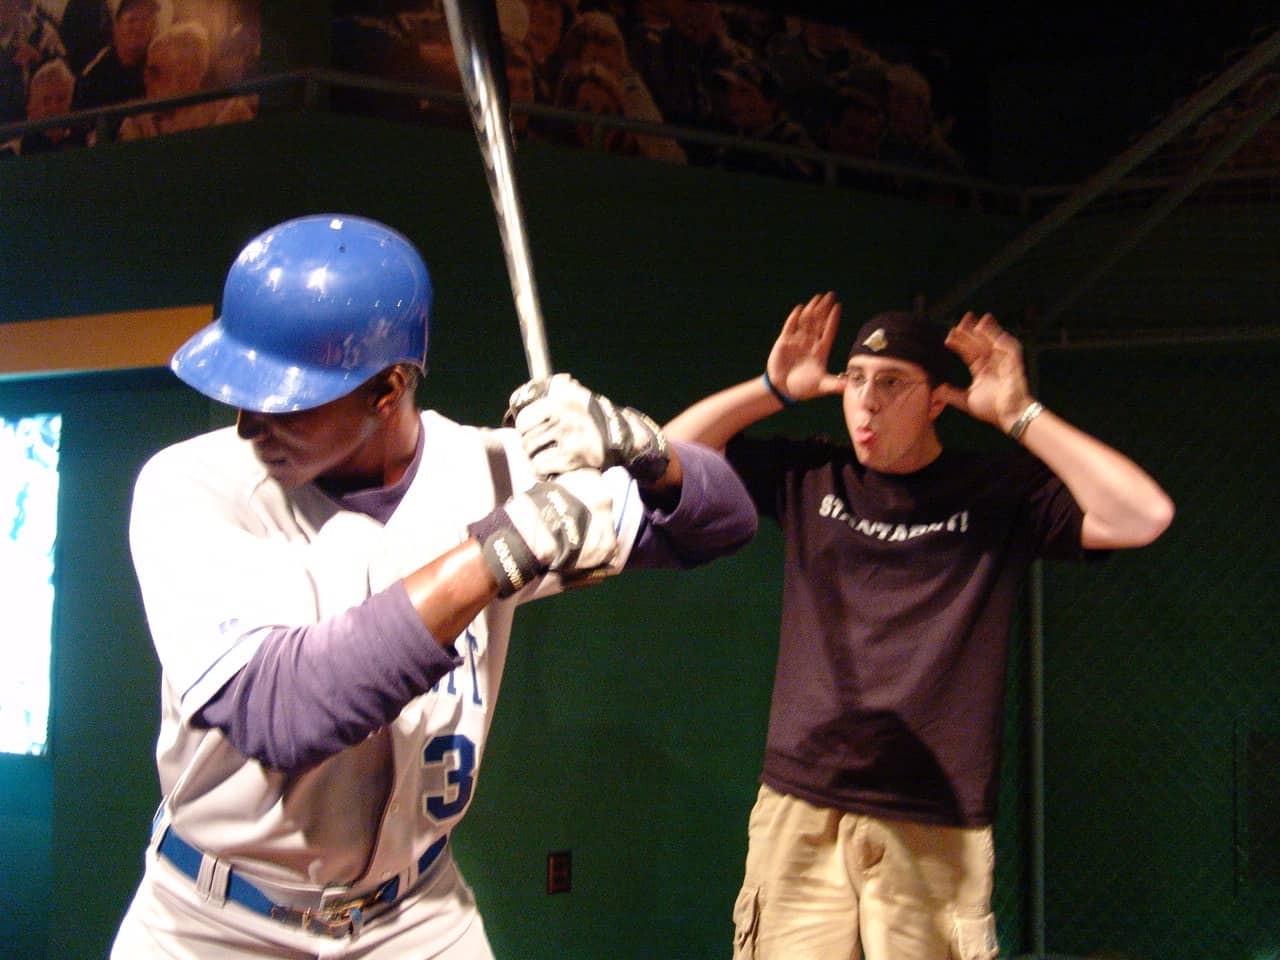 Distracting a batter at the Louisville Slugger Museum in Louisville, Kentucky